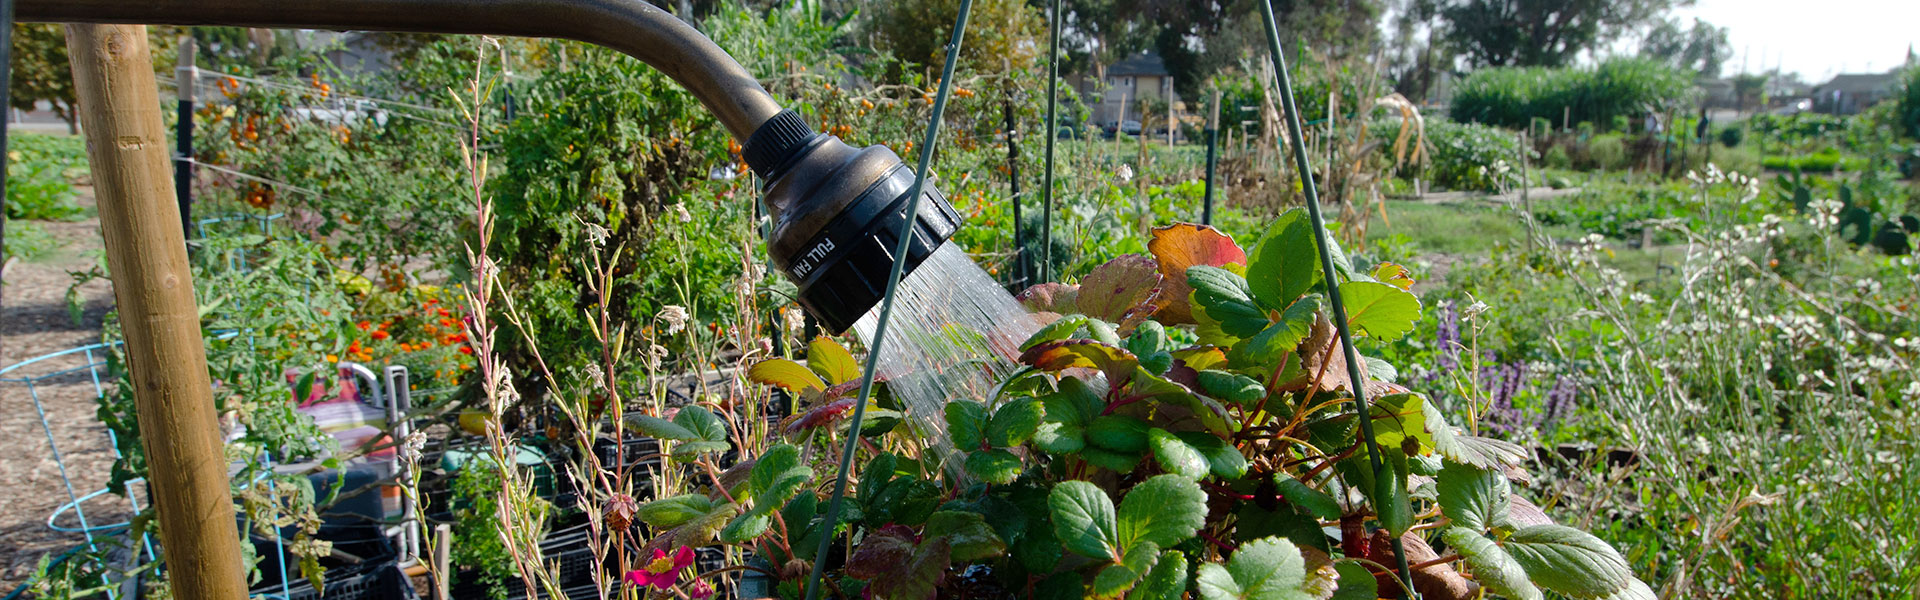 Photo of plant being watered at a LA County community garden.